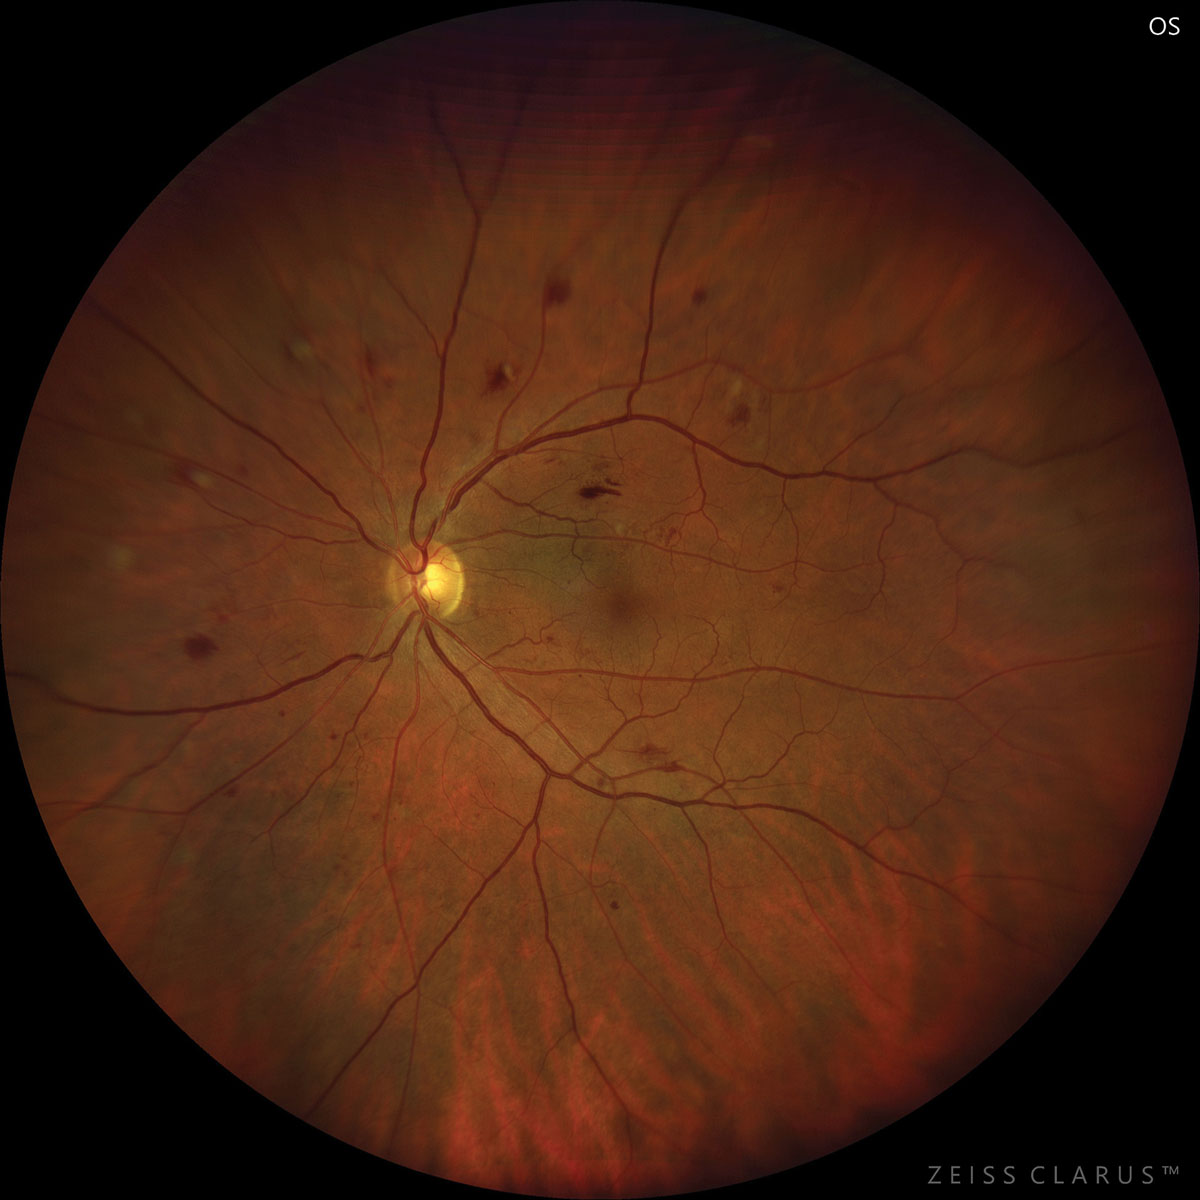 It may be prudent to screen diabetic retinopathy patients for signs of depression, either formally with a survey instrument or just by being attuned to cues from the individual.